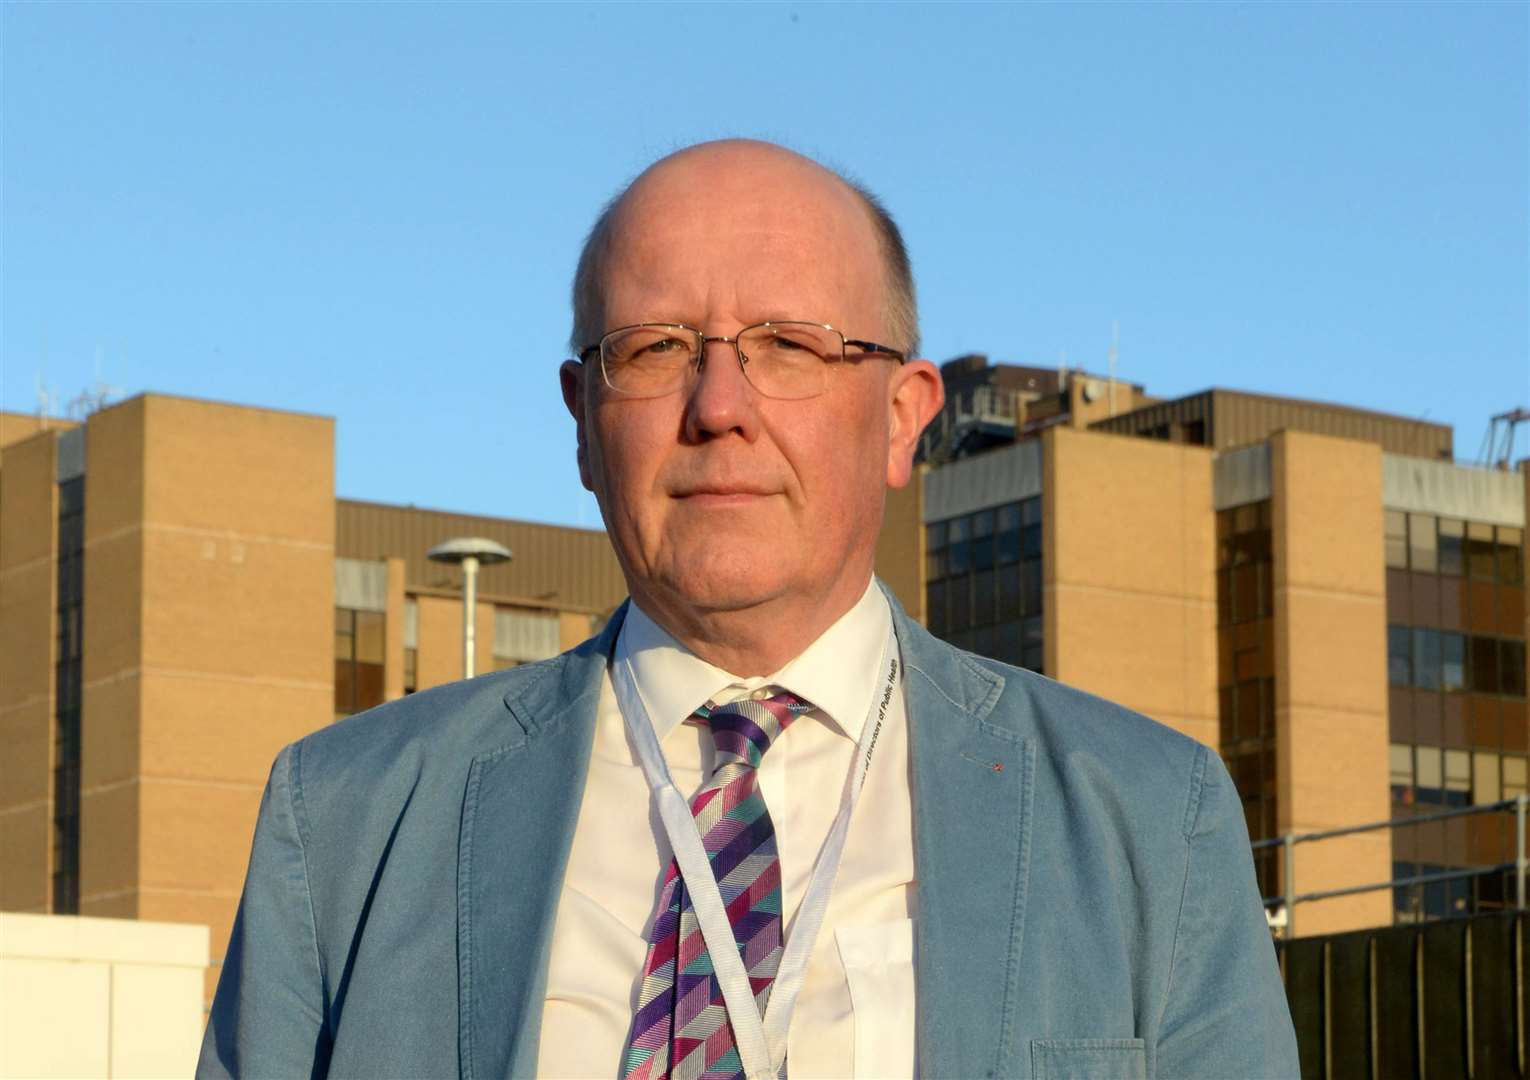 Dr Tim Allison, the director of public health at NHS Highland: 'Our aim has been to ensure those who are immunosuppressed are offered the dose they are eligible for at the earliest opportunity.'